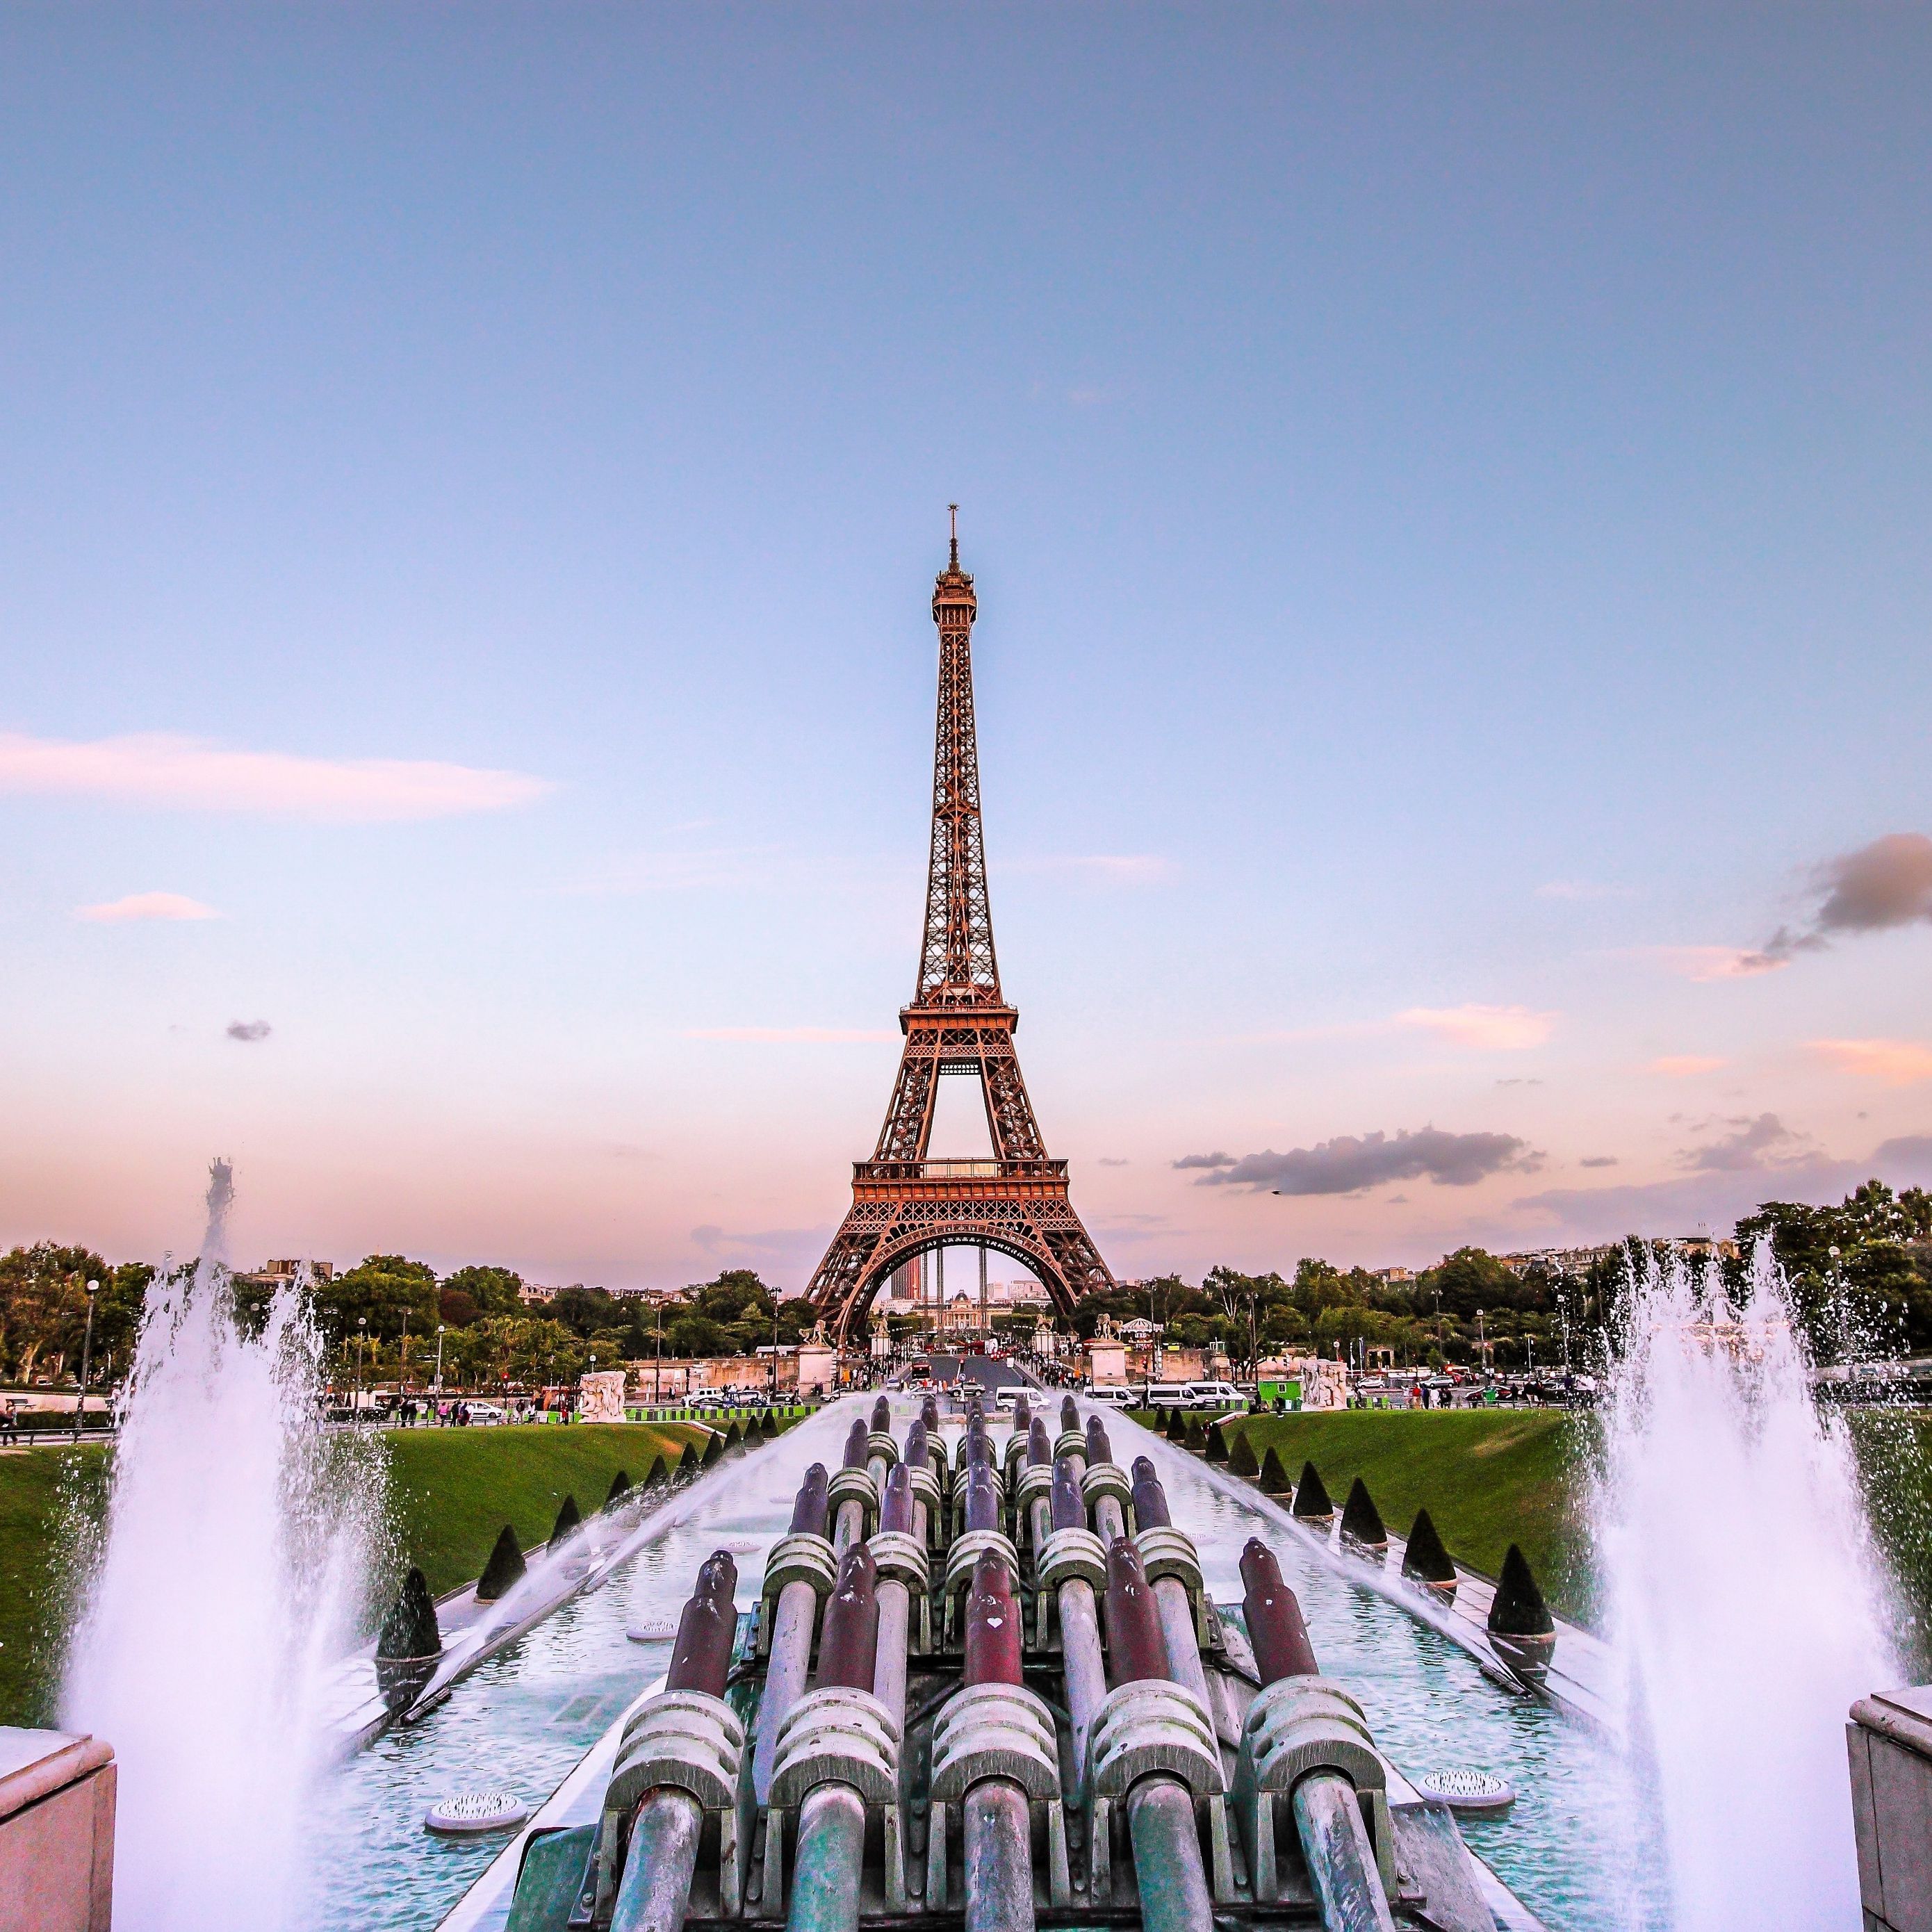 A beautiful view of the Eiffel Tower with a fountain in the foreground. - Eiffel Tower